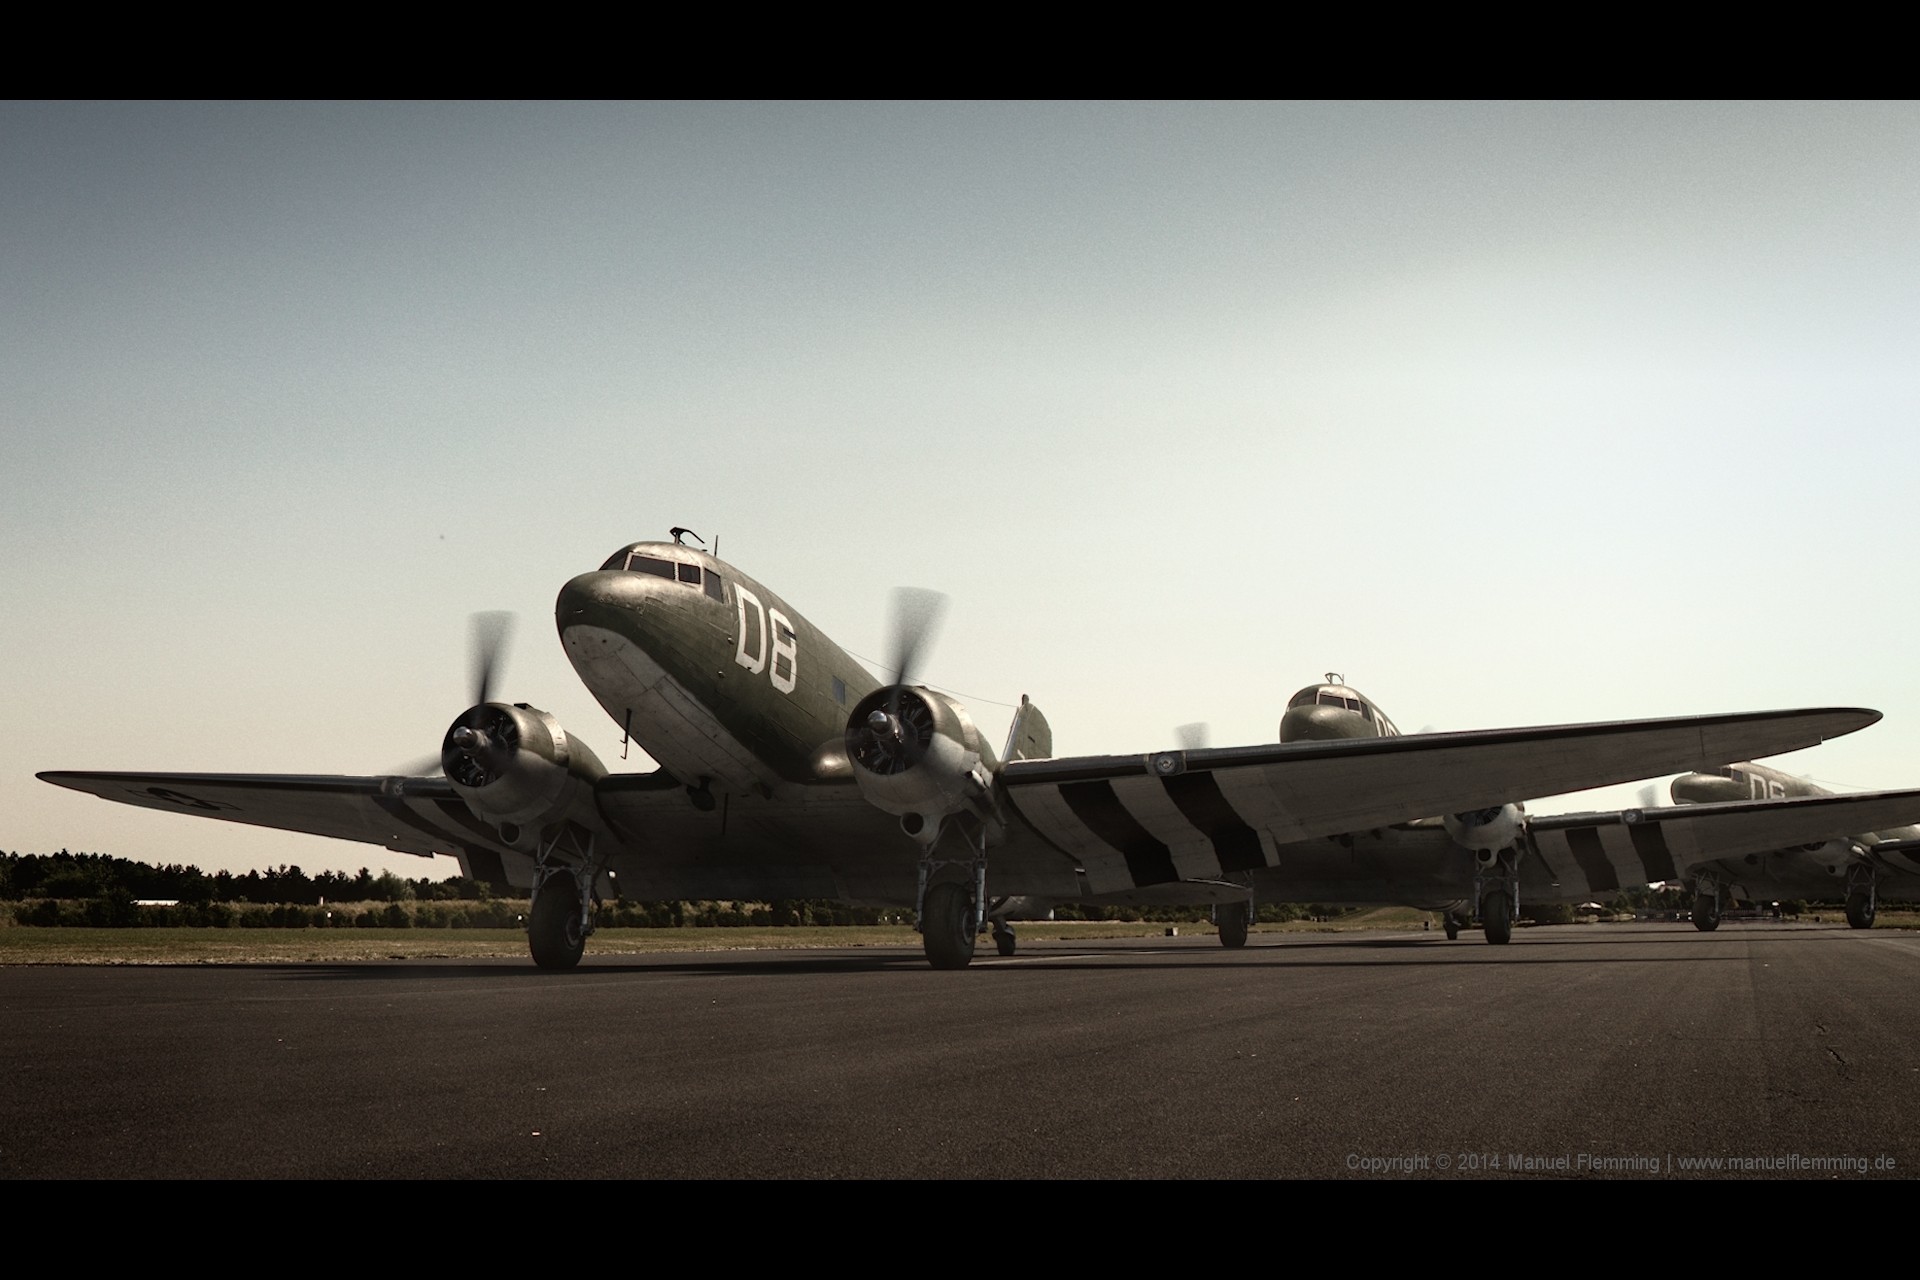 A rendering of multiple C-47 at take off - created using Maya, Mari, Vray and Nuke. I'm responsible for HDRI & Plate photography, modeling, texturing, shading, lighting, rendering and compositing.